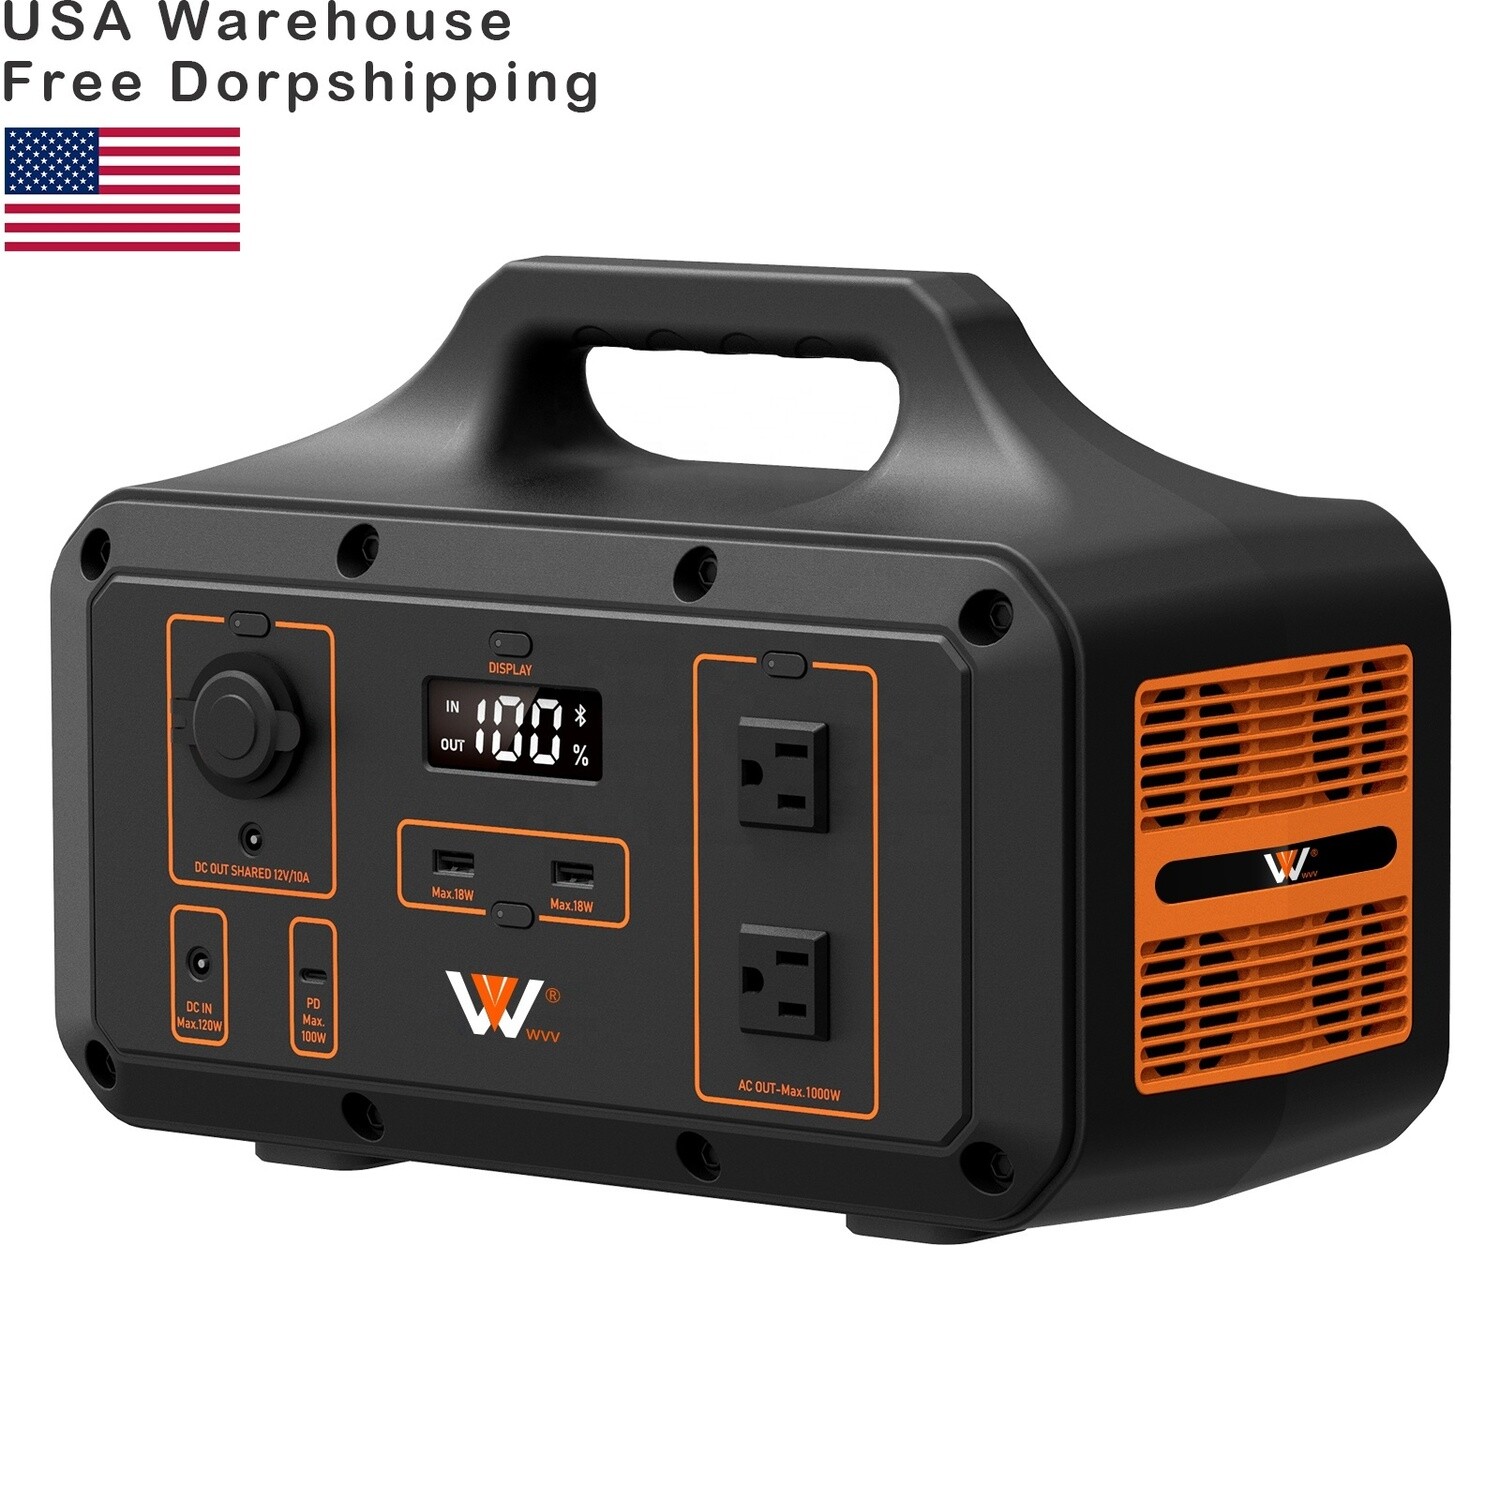 USA Local Stock Warehouse Freeshipping 1000w Portable Outdoor Camping Lithium Battery Backup Supplies Generator Power Station